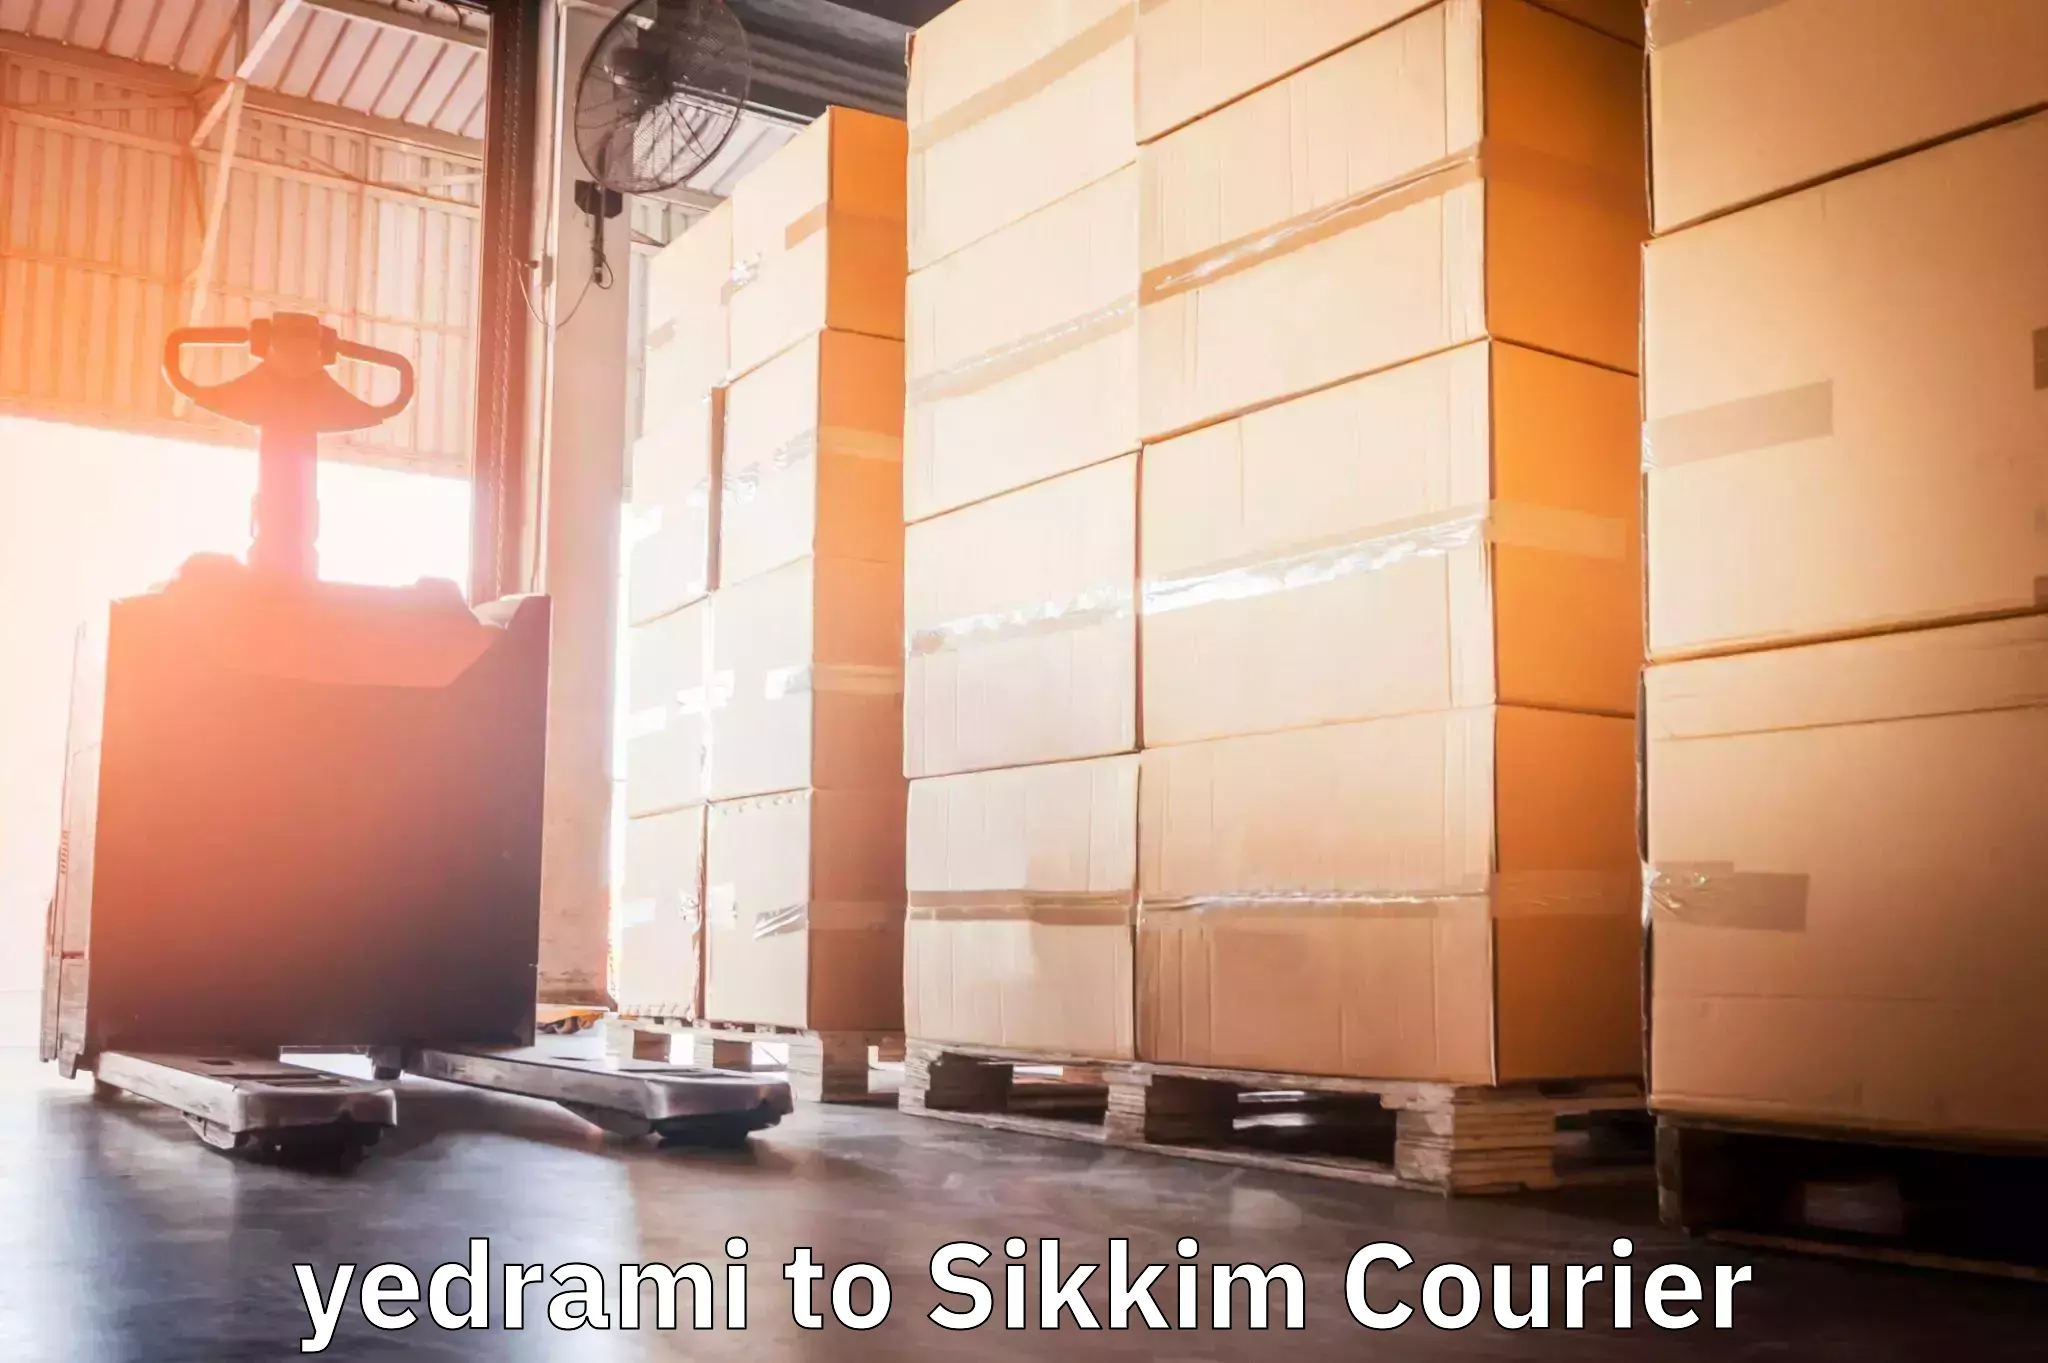 Sustainable delivery practices yedrami to Sikkim